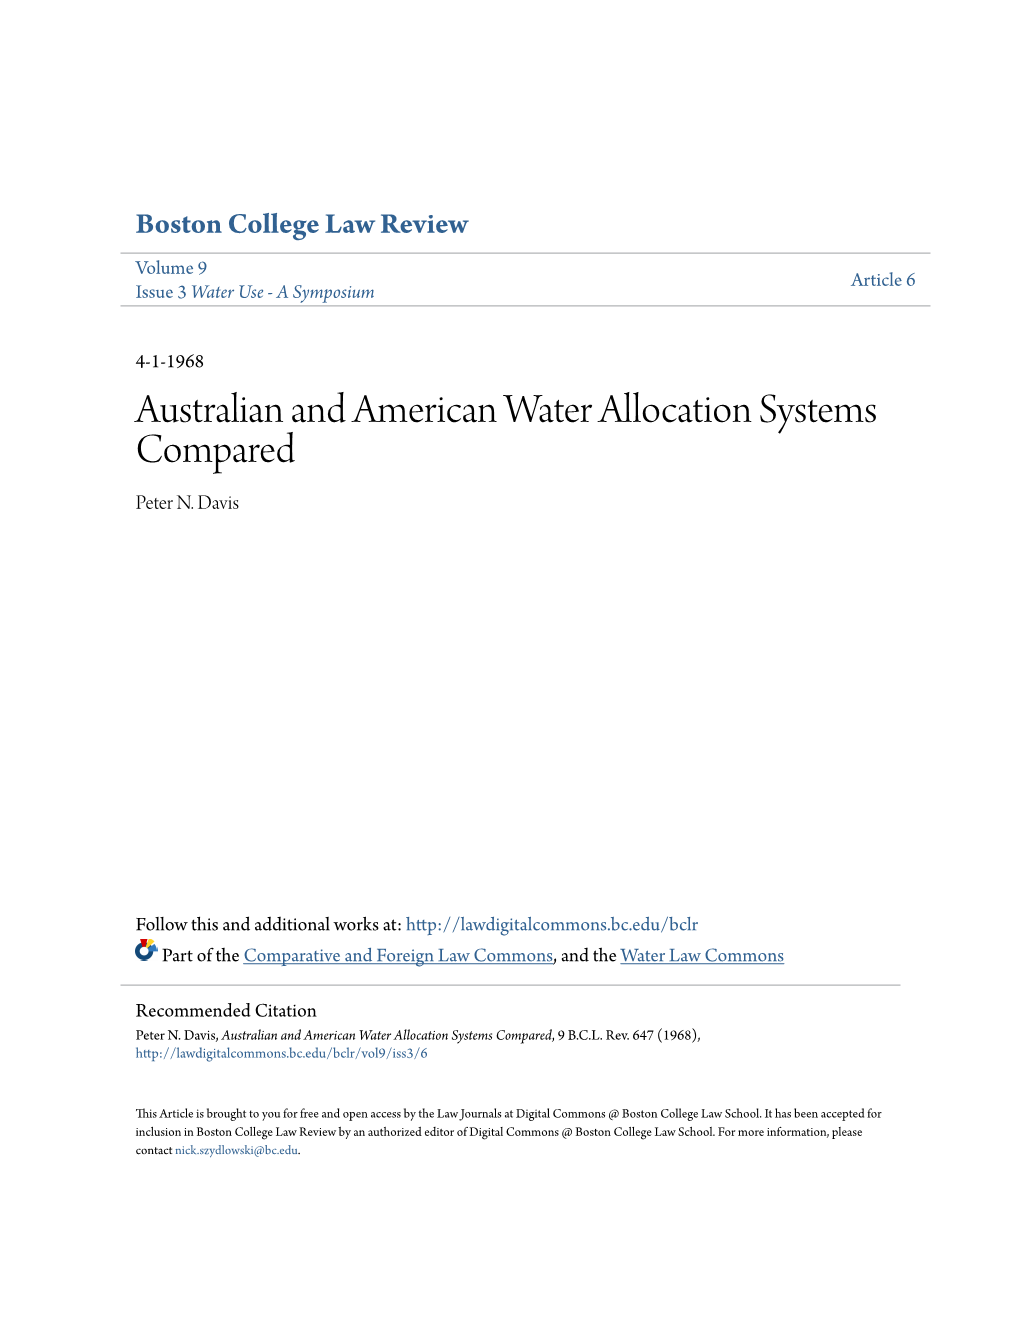 Australian and American Water Allocation Systems Compared Peter N